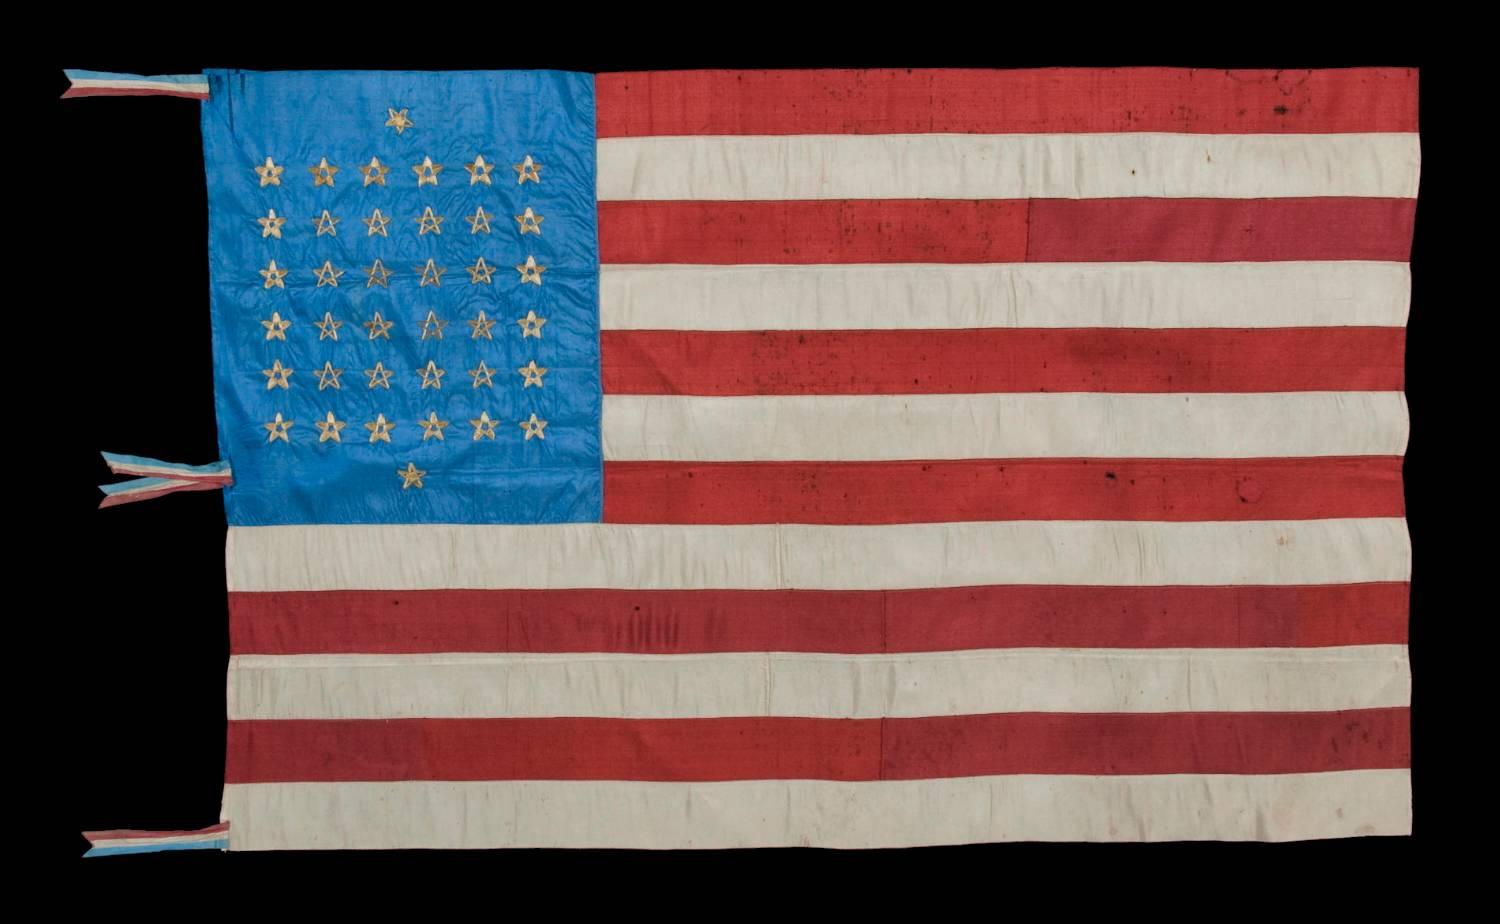 38 STAR, SILK FLAG WITH 12 STRIPES AND THREE DIFFERENT STYLES OF HAND-EMBROIDERED STARS, ARRANGED TO REFLECT THE NUMBER OF NORTHERN AND SOUTHERN SUPPORTING STATES DURING THE CIVIL WAR, AND RESULTING IN ONE OF THE MOST RARE STAR CONFIGURATIONS EXTANT